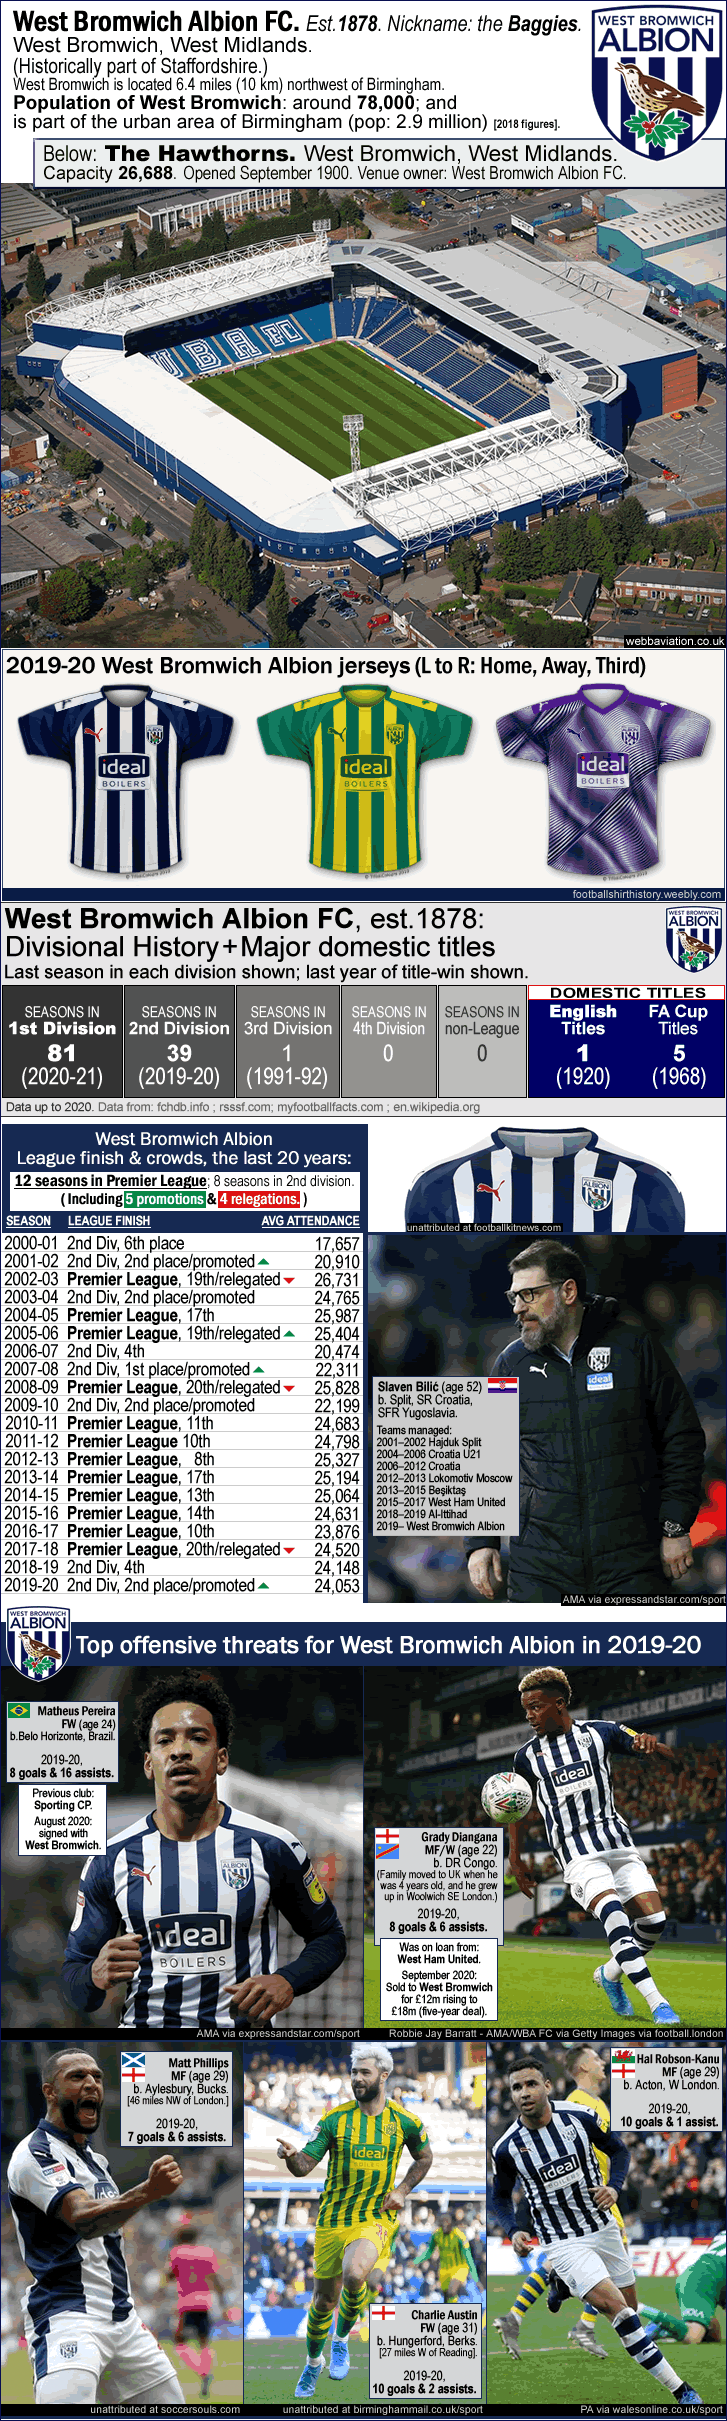 west-bromwich-albion_promoted-2020_the-hawthorns_slaven-bilic_m-pereira_g-diangana_m-phillips_c-austin_h-robson-kanu_m_.gif